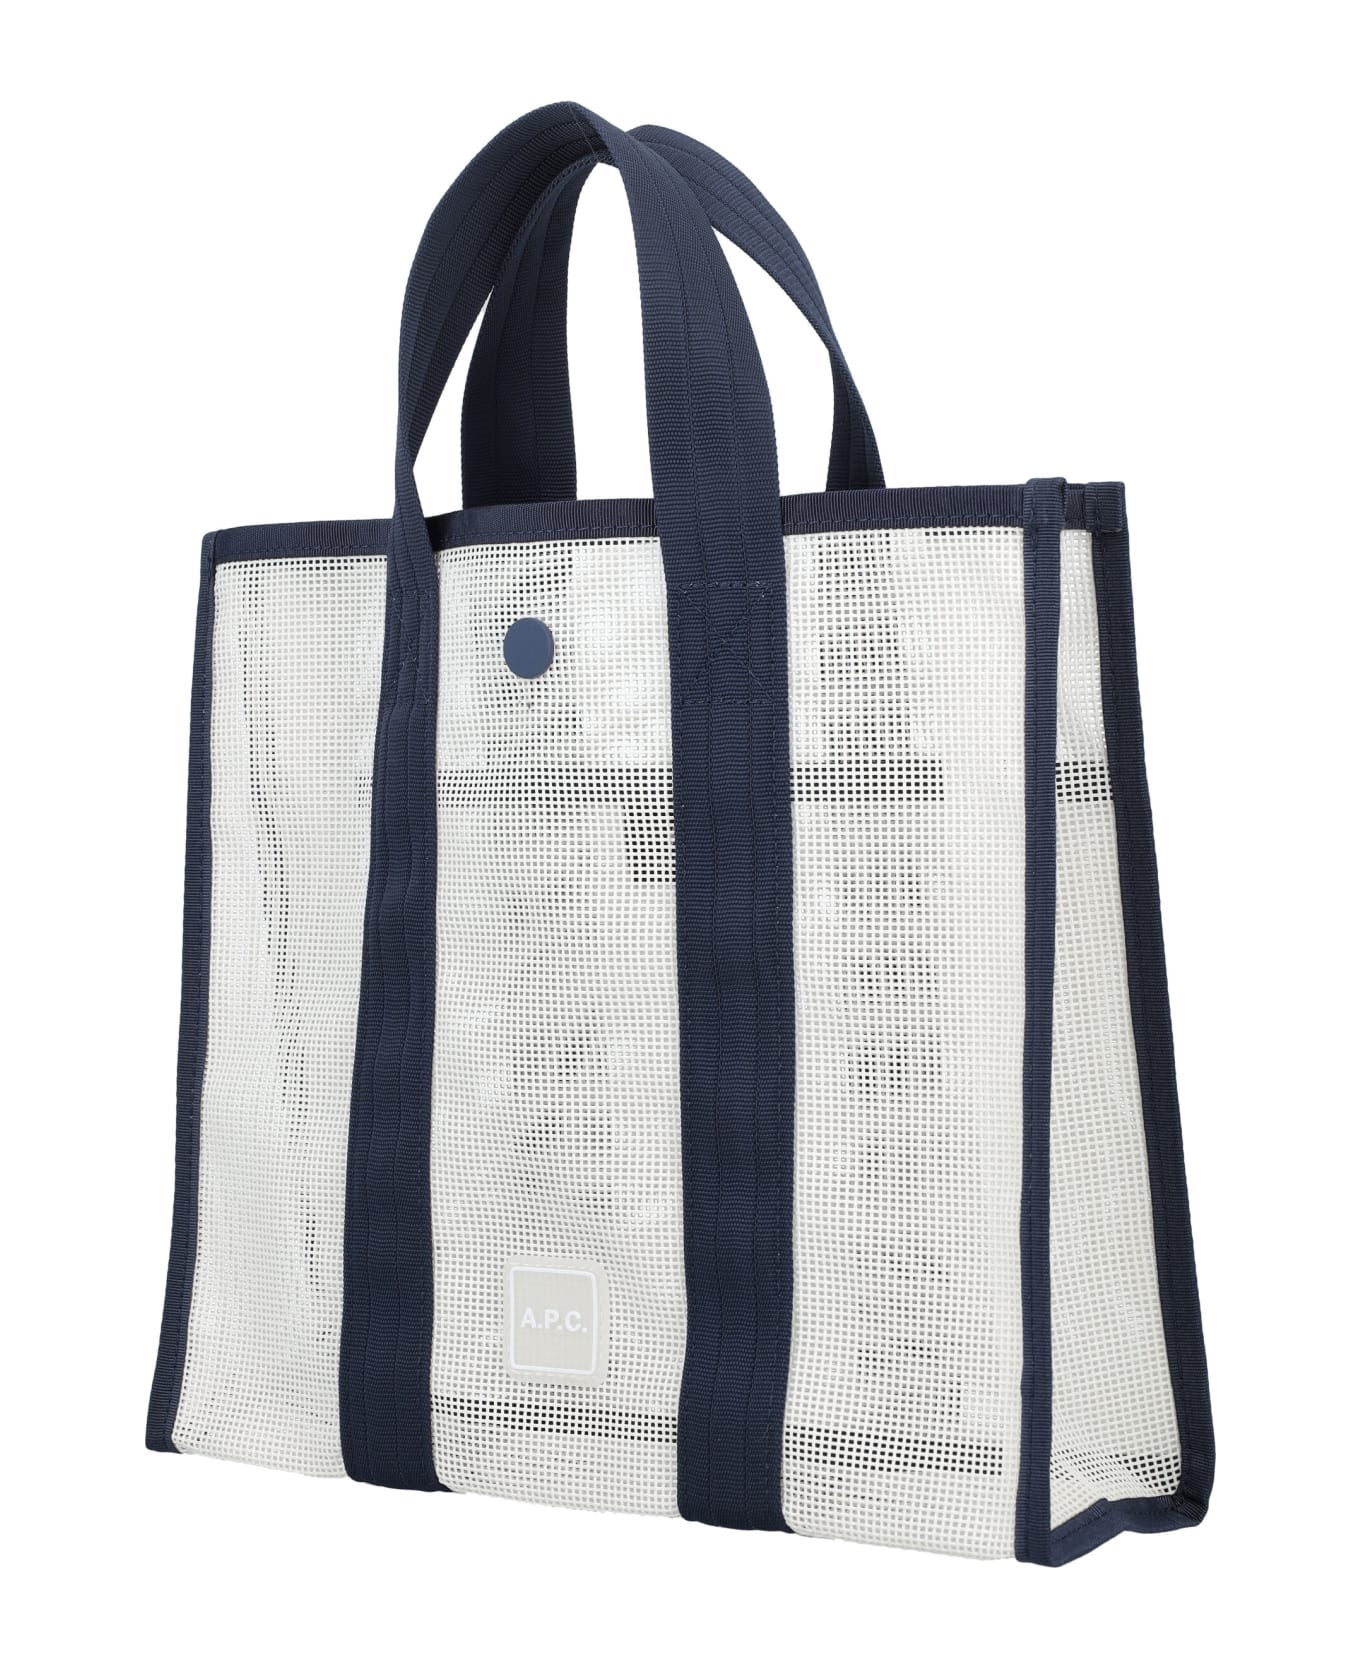 A.P.C. Cabas Louise Tote Bag - WHITE/NAVY